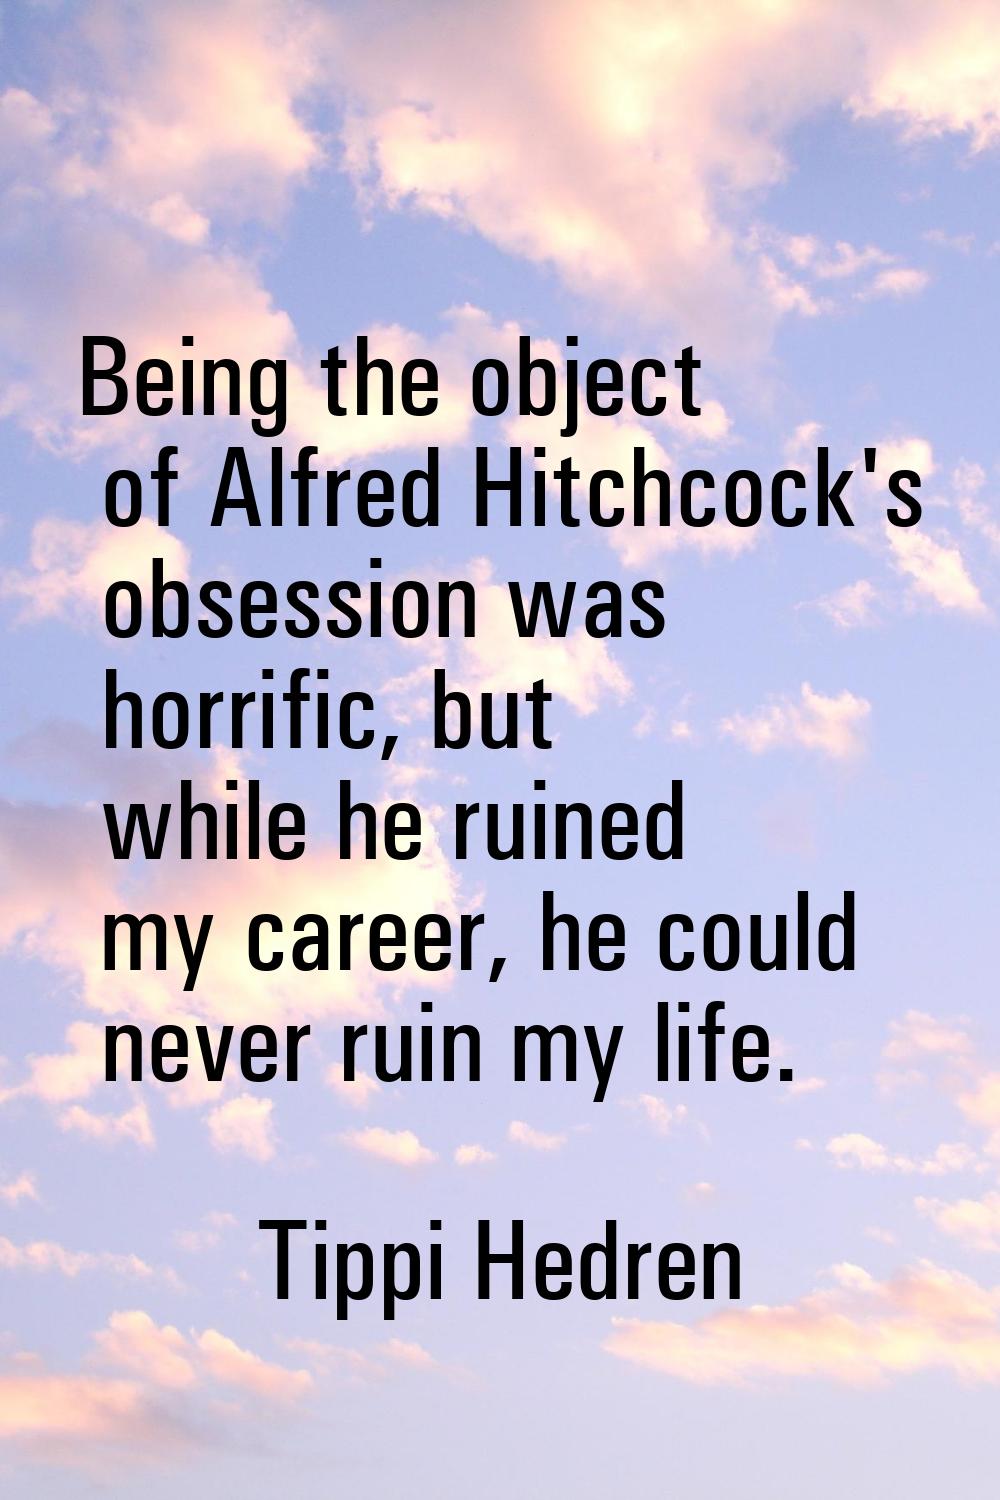 Being the object of Alfred Hitchcock's obsession was horrific, but while he ruined my career, he co